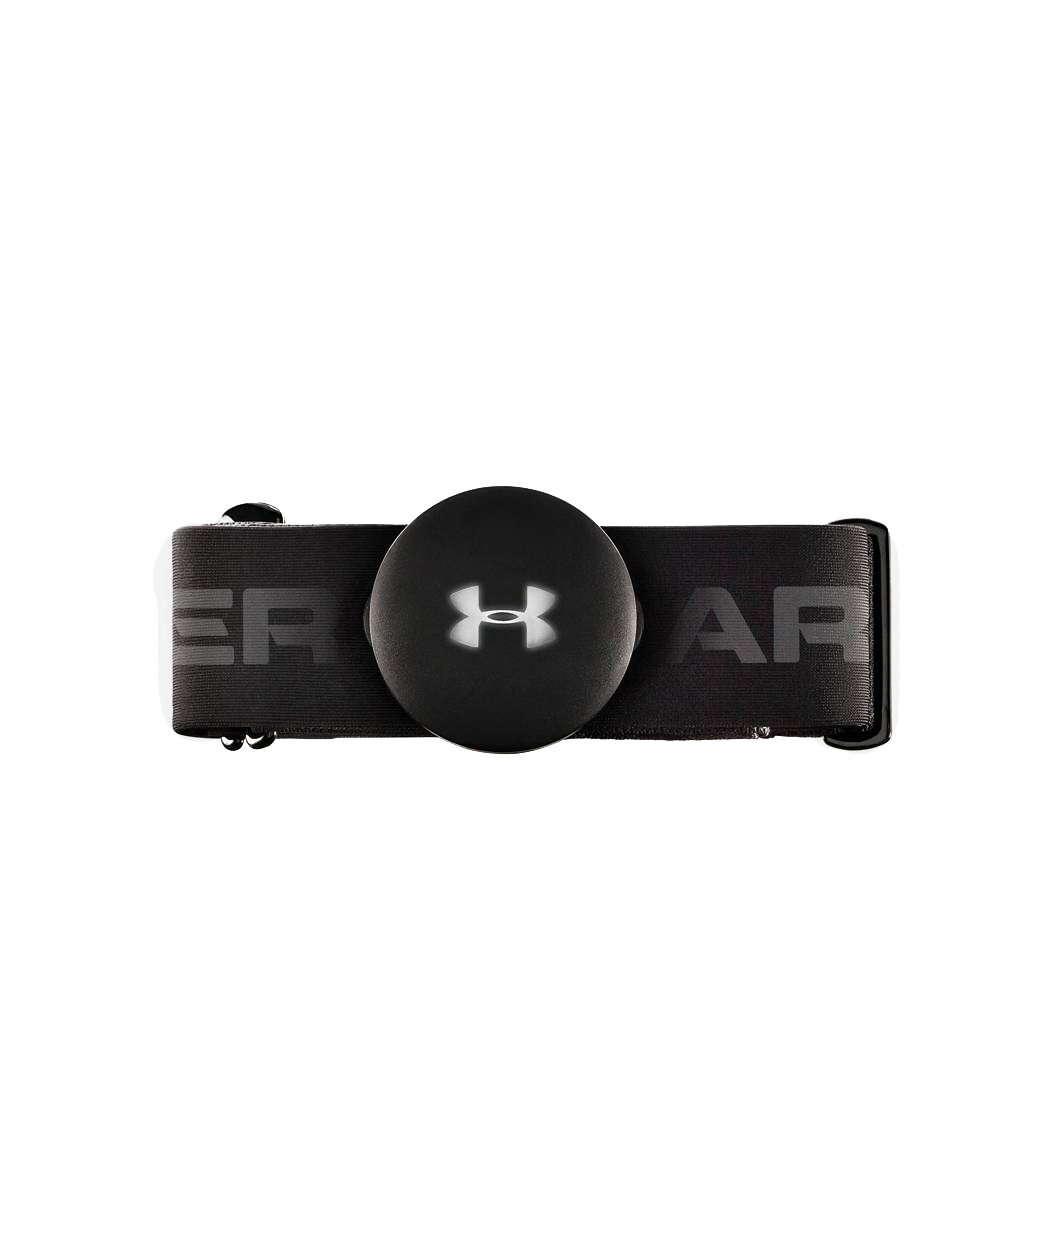 Buy UA Heart Rate Monitor online in 